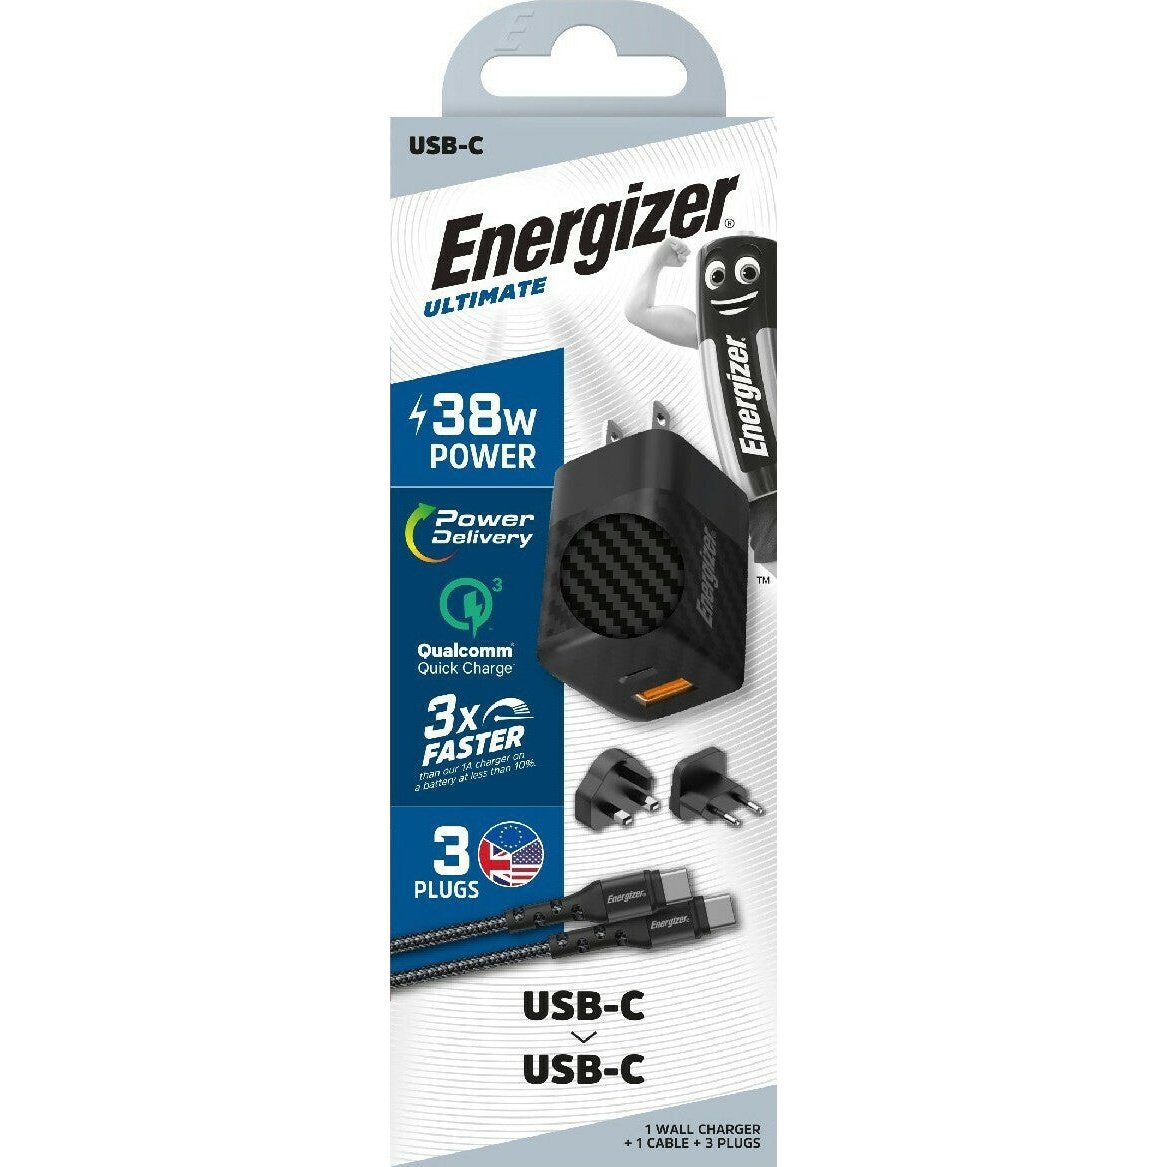 Energizer USB-C Cable & USB-C / USB-A Wall Adapter 38W